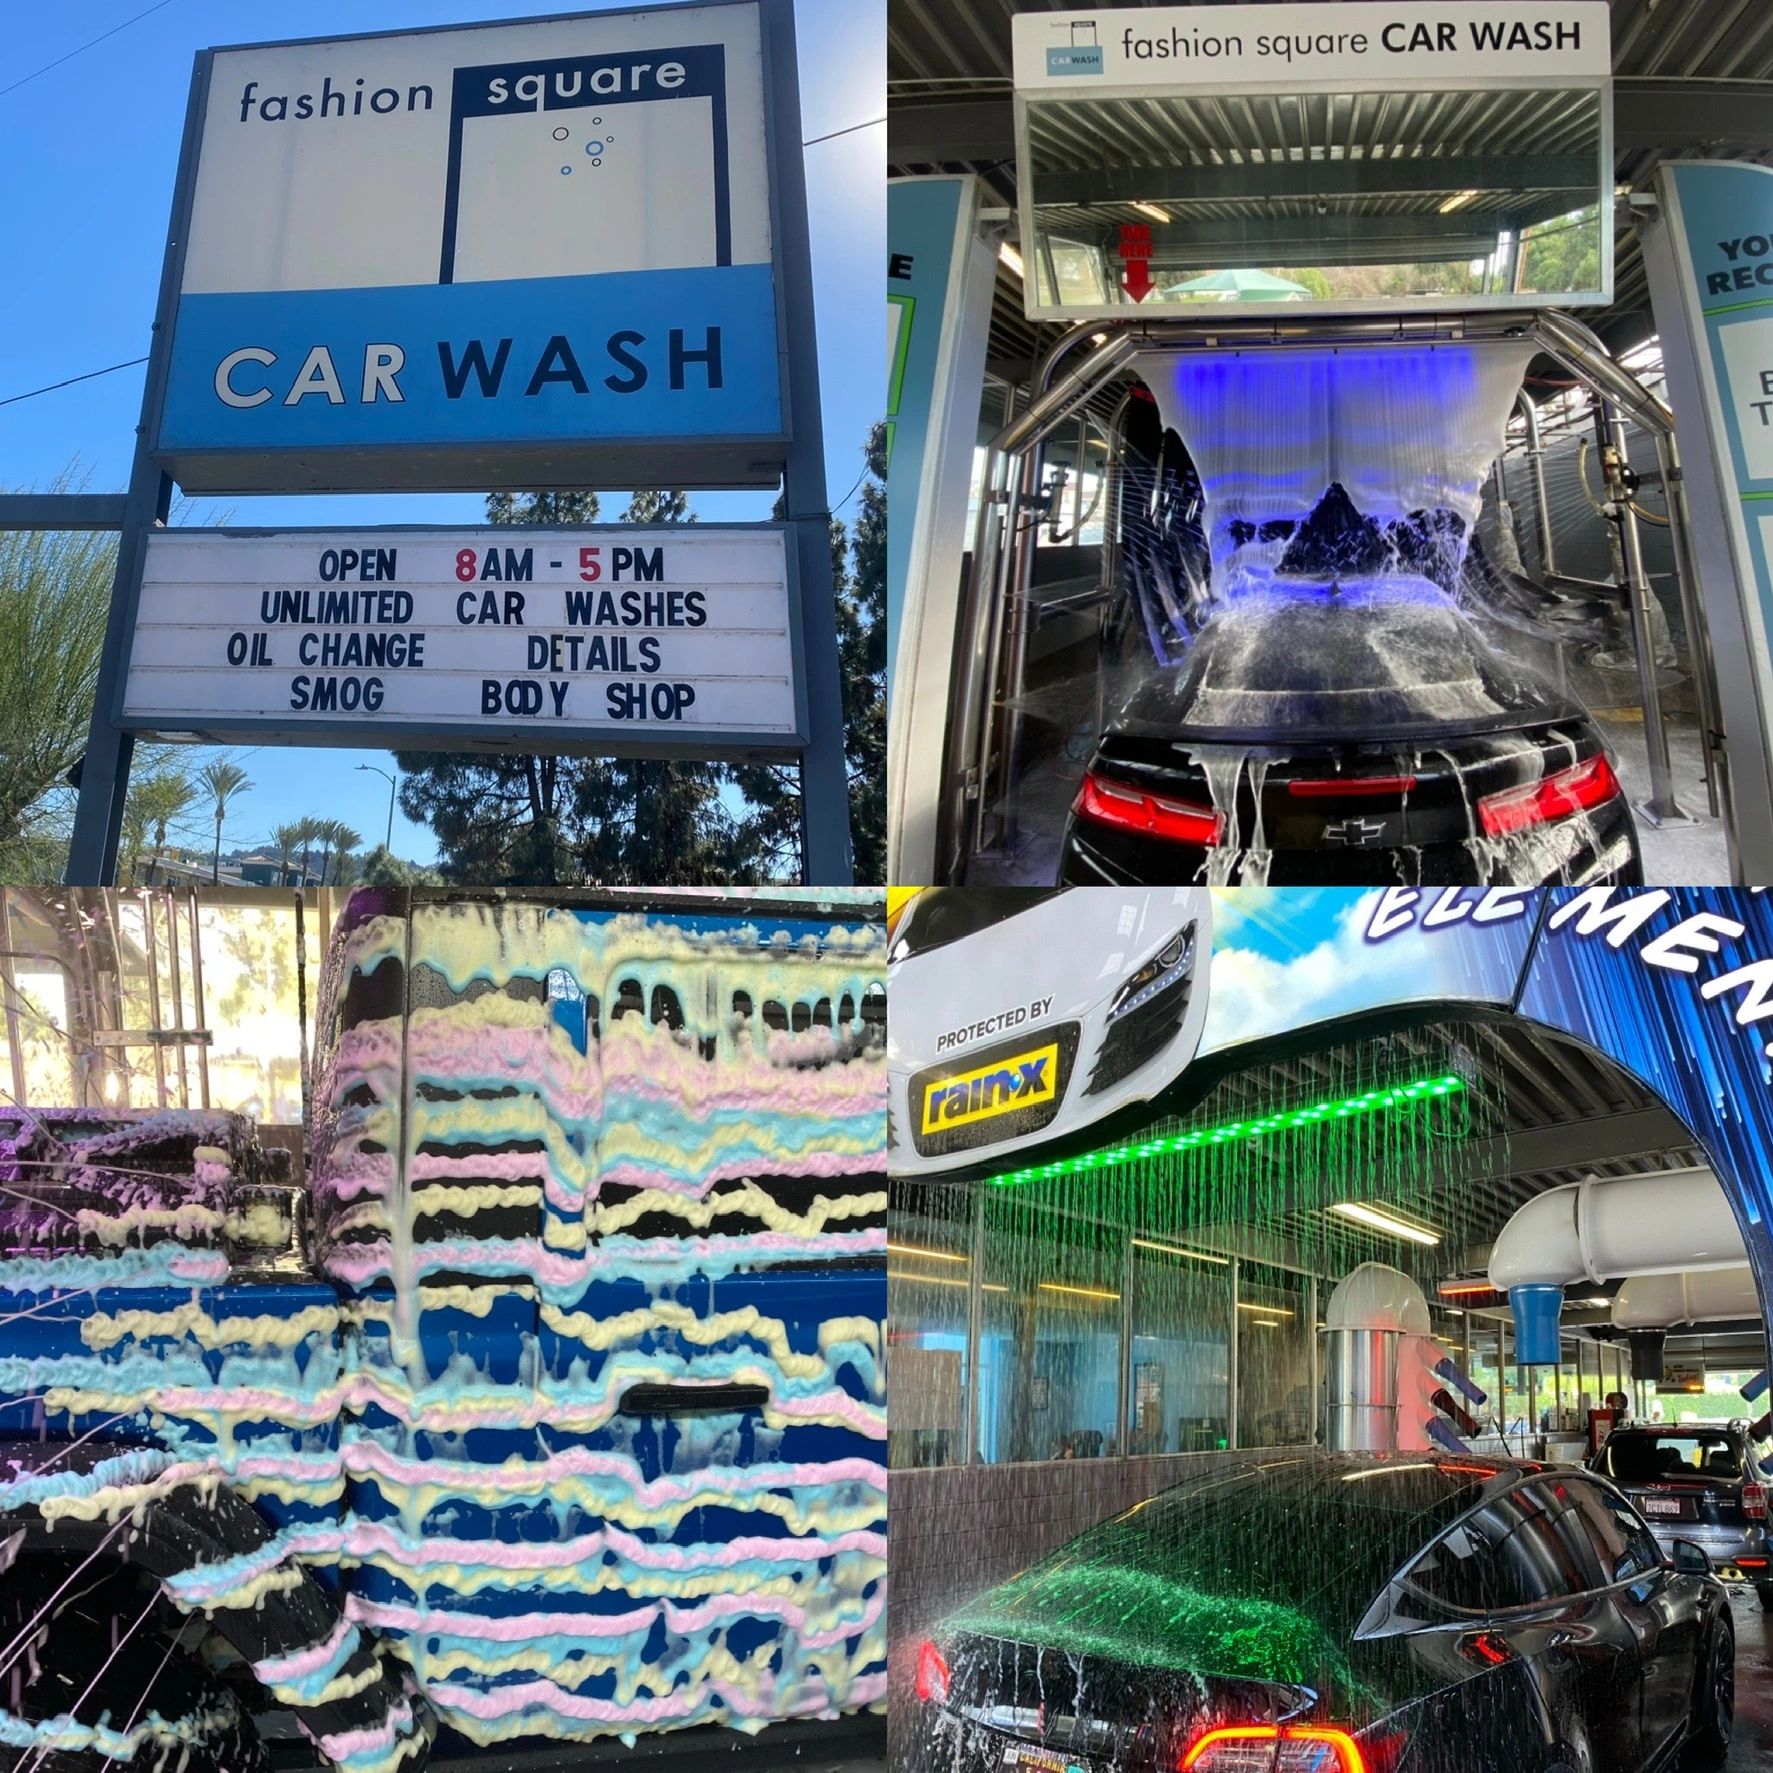 Fashion Square Car Wash is the best Carwash Auto Detailing Oil